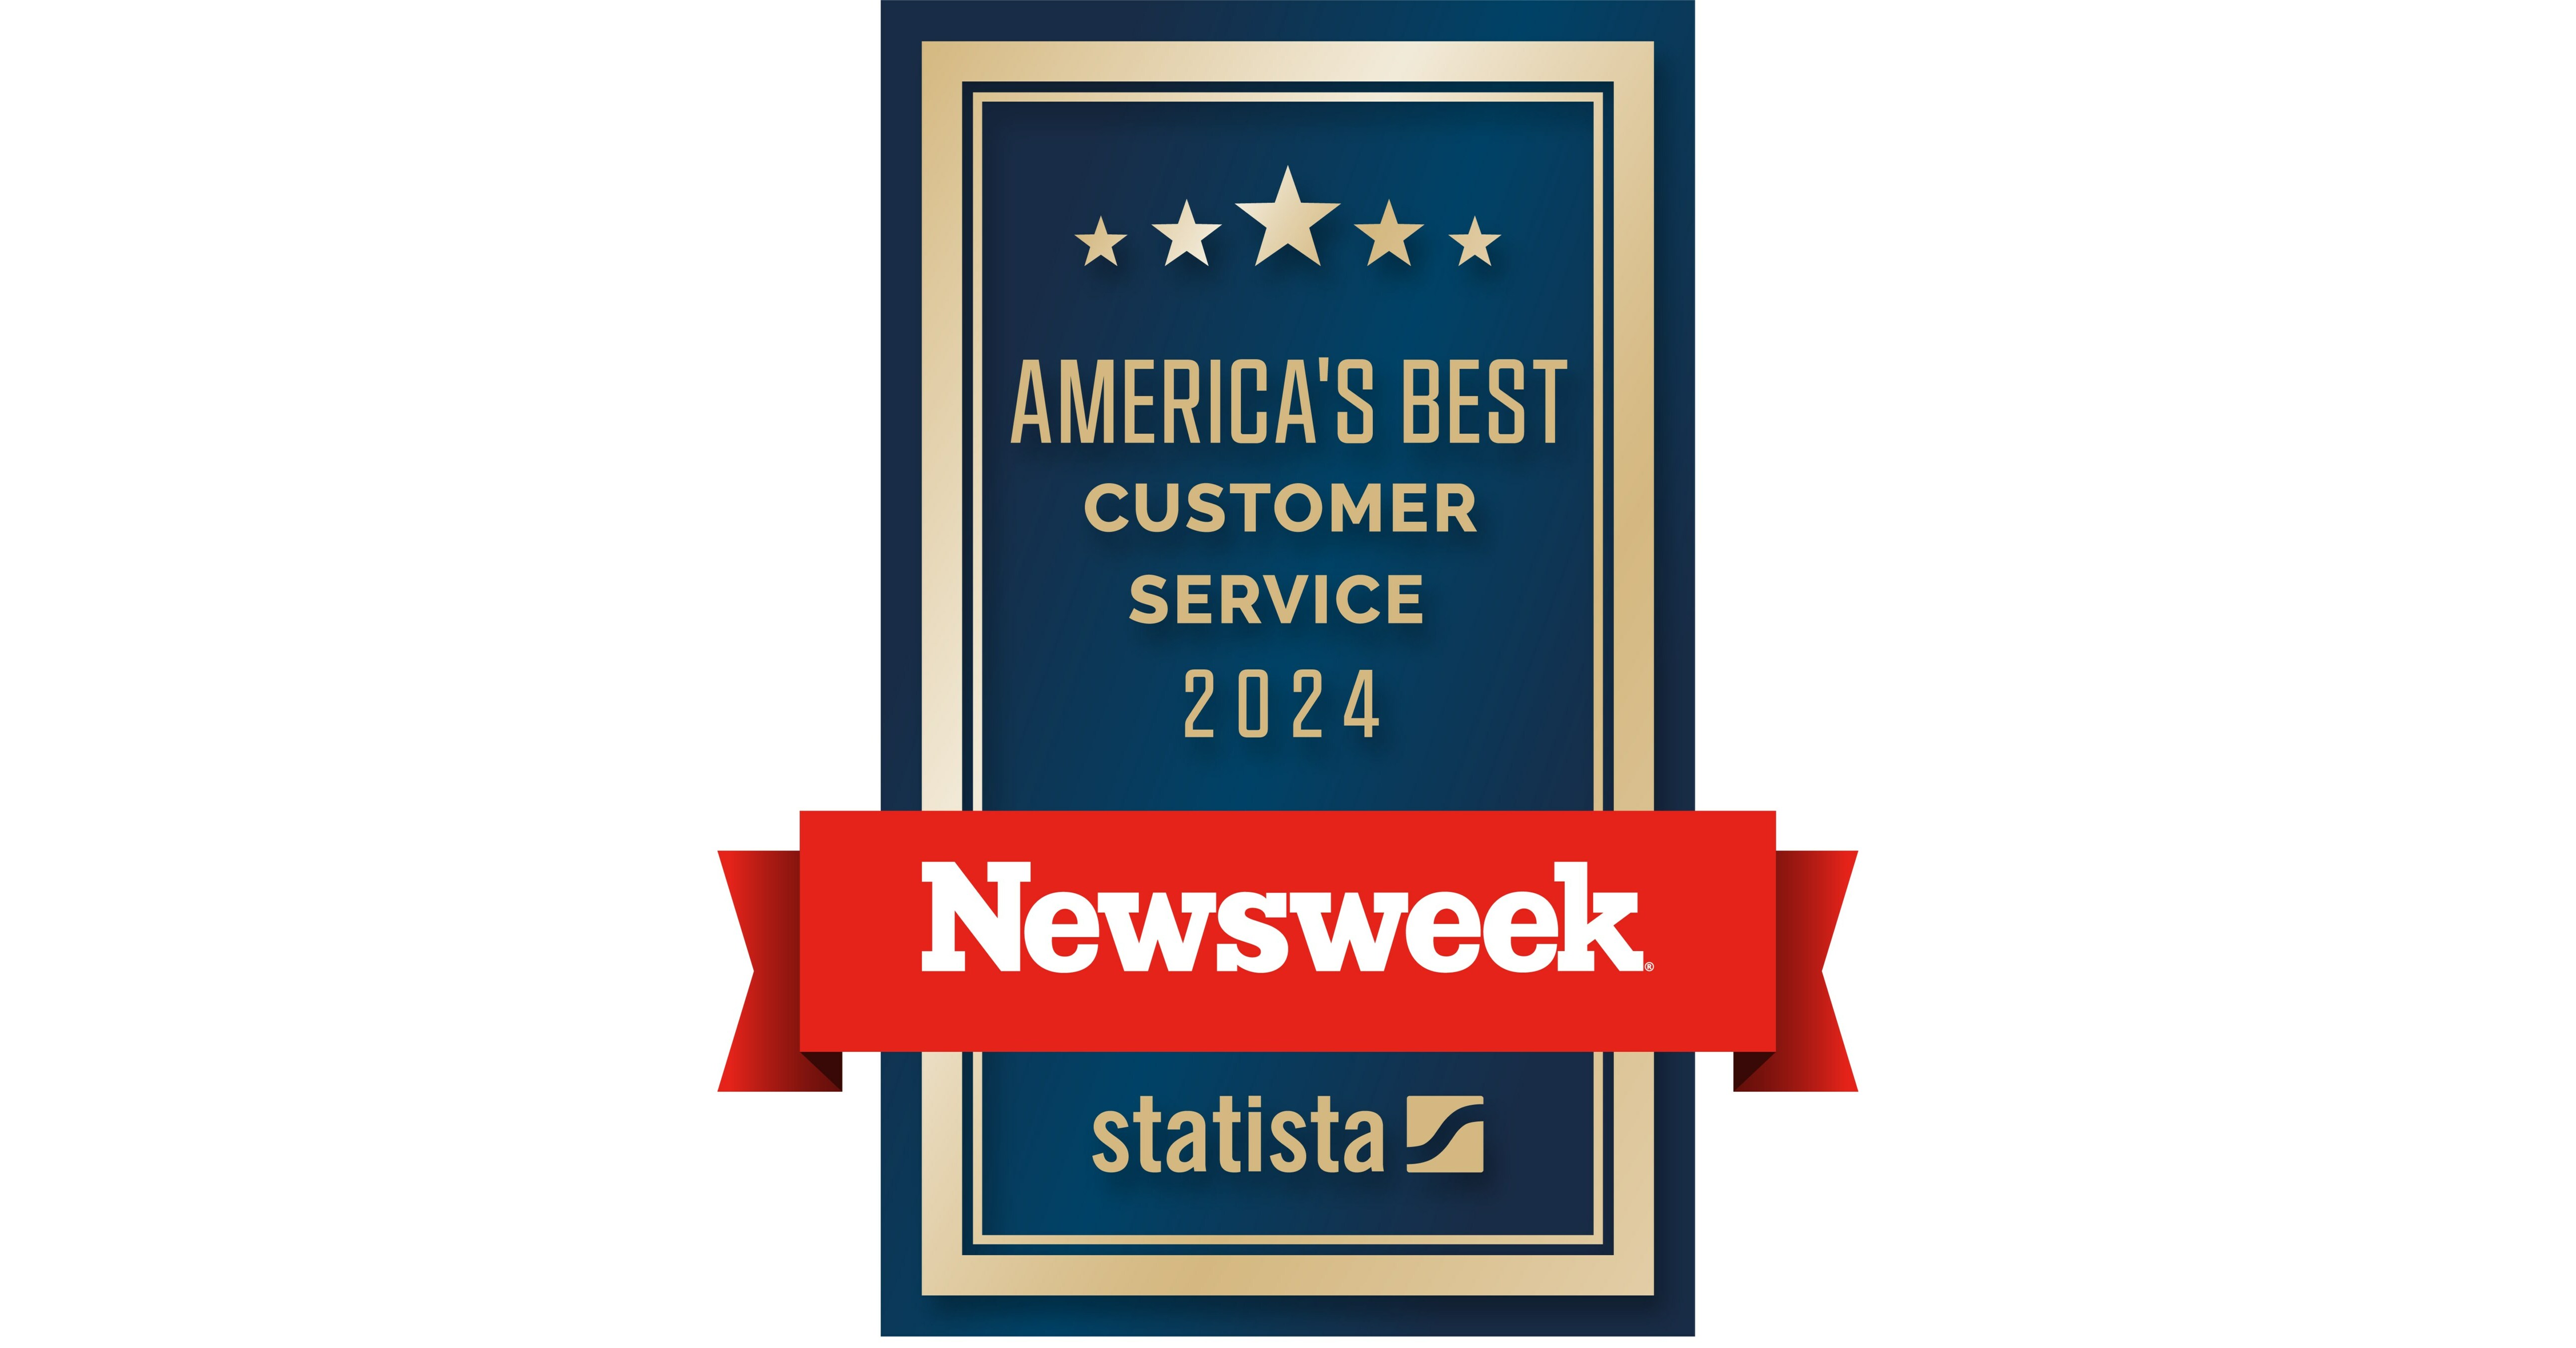 Beltone Earns Newsweek's Recognition as One of America's Best Customer